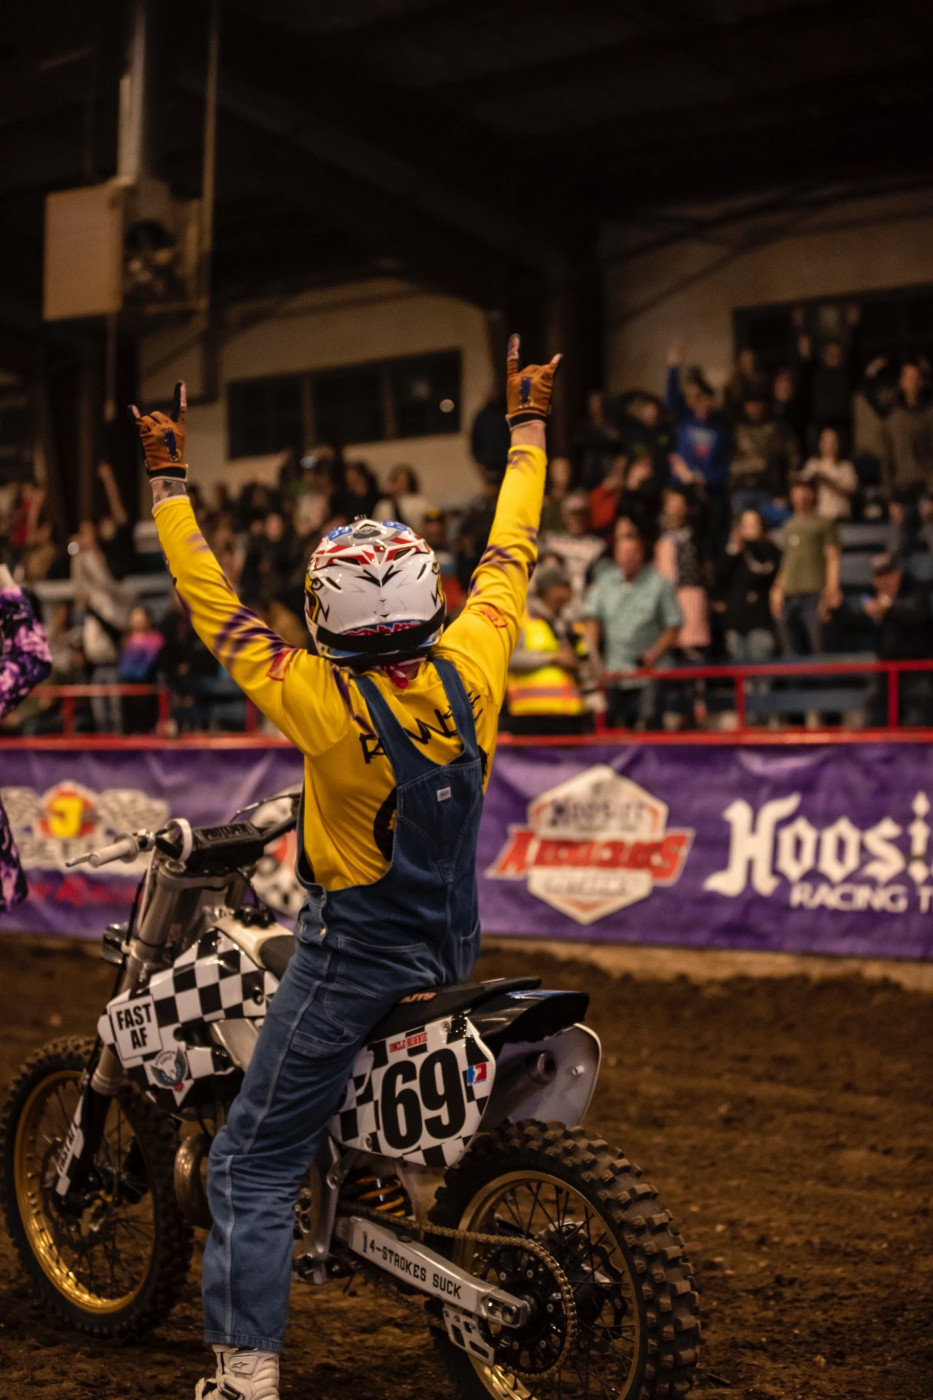 Dirt Bike News - RonnieMac Fights Off a 4-Stoker and Wins the Hoosier Arenacross Series